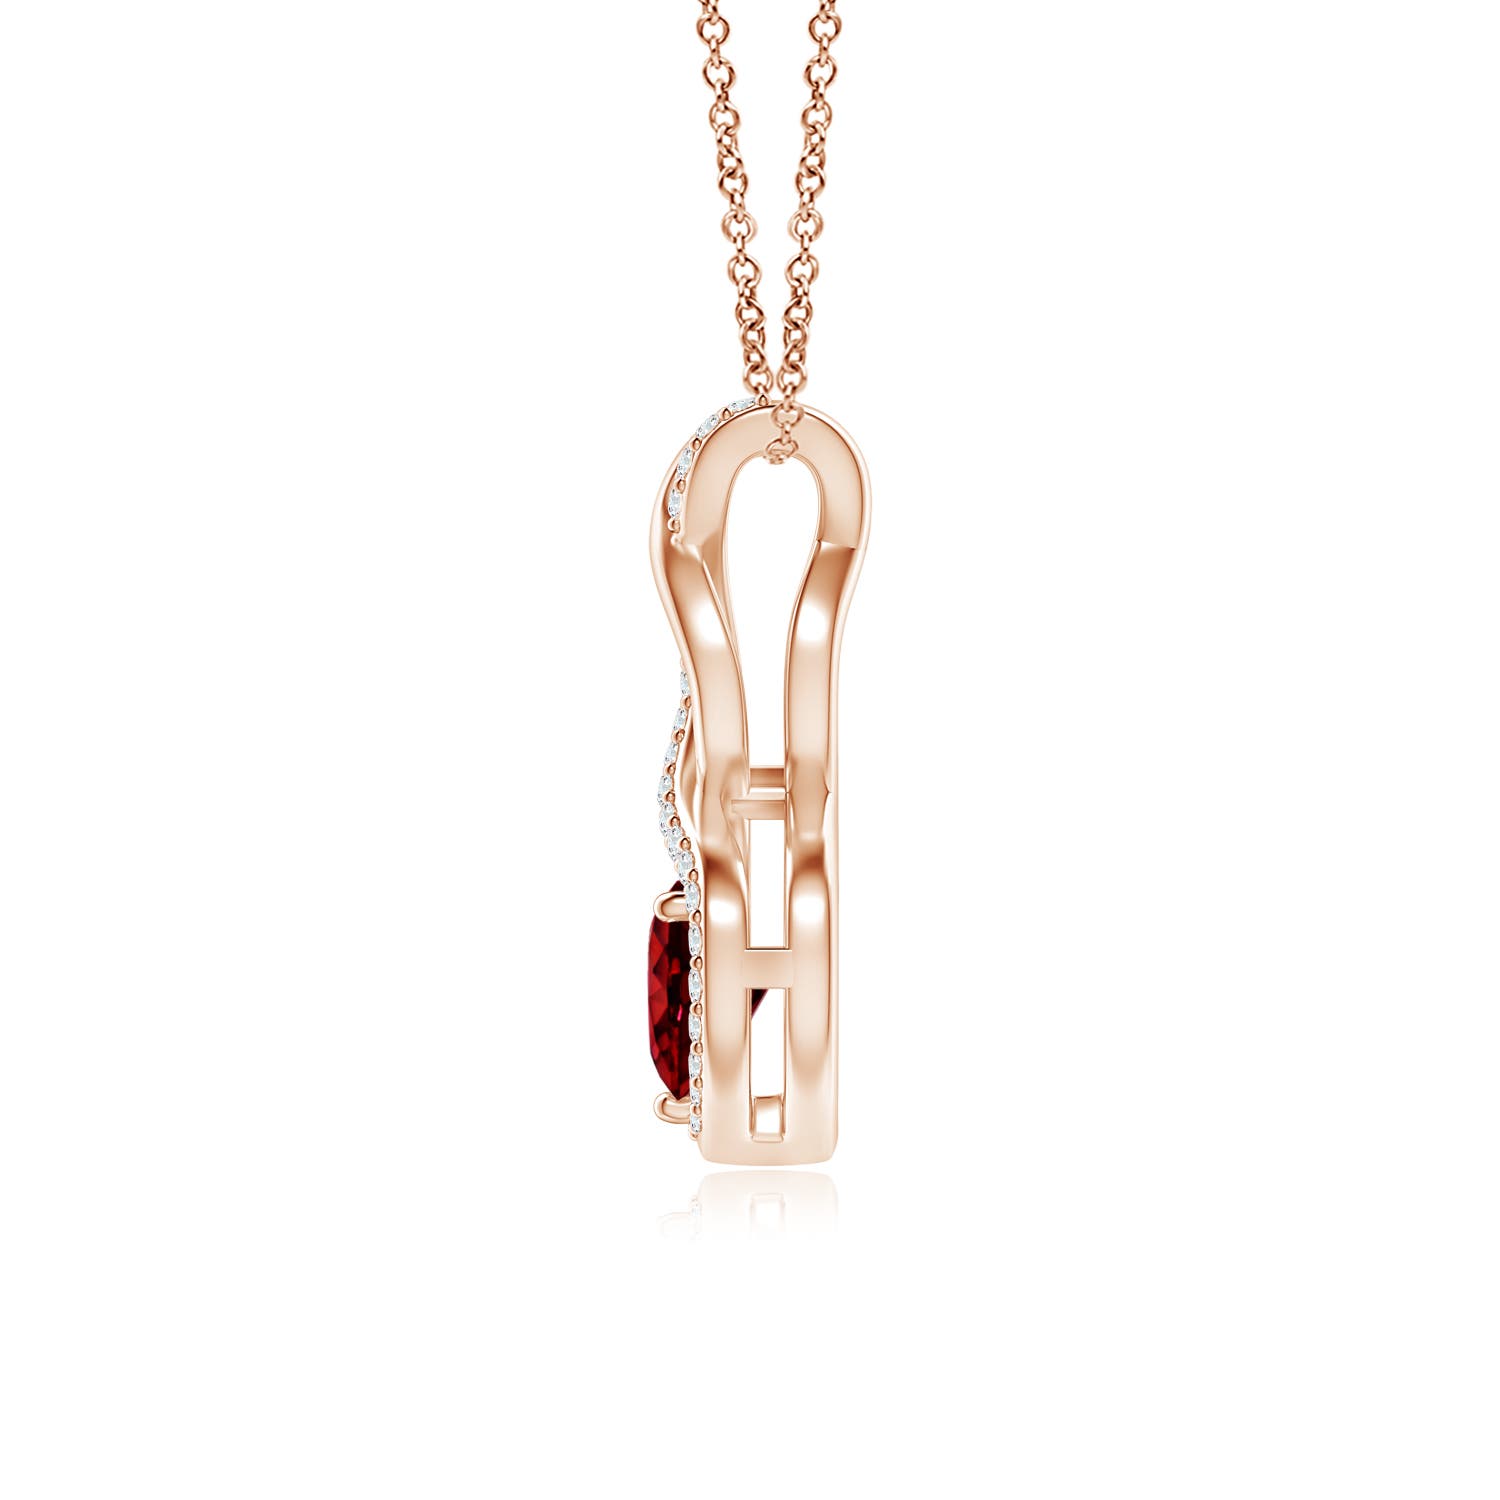 AAAA - Ruby / 0.61 CT / 14 KT Rose Gold